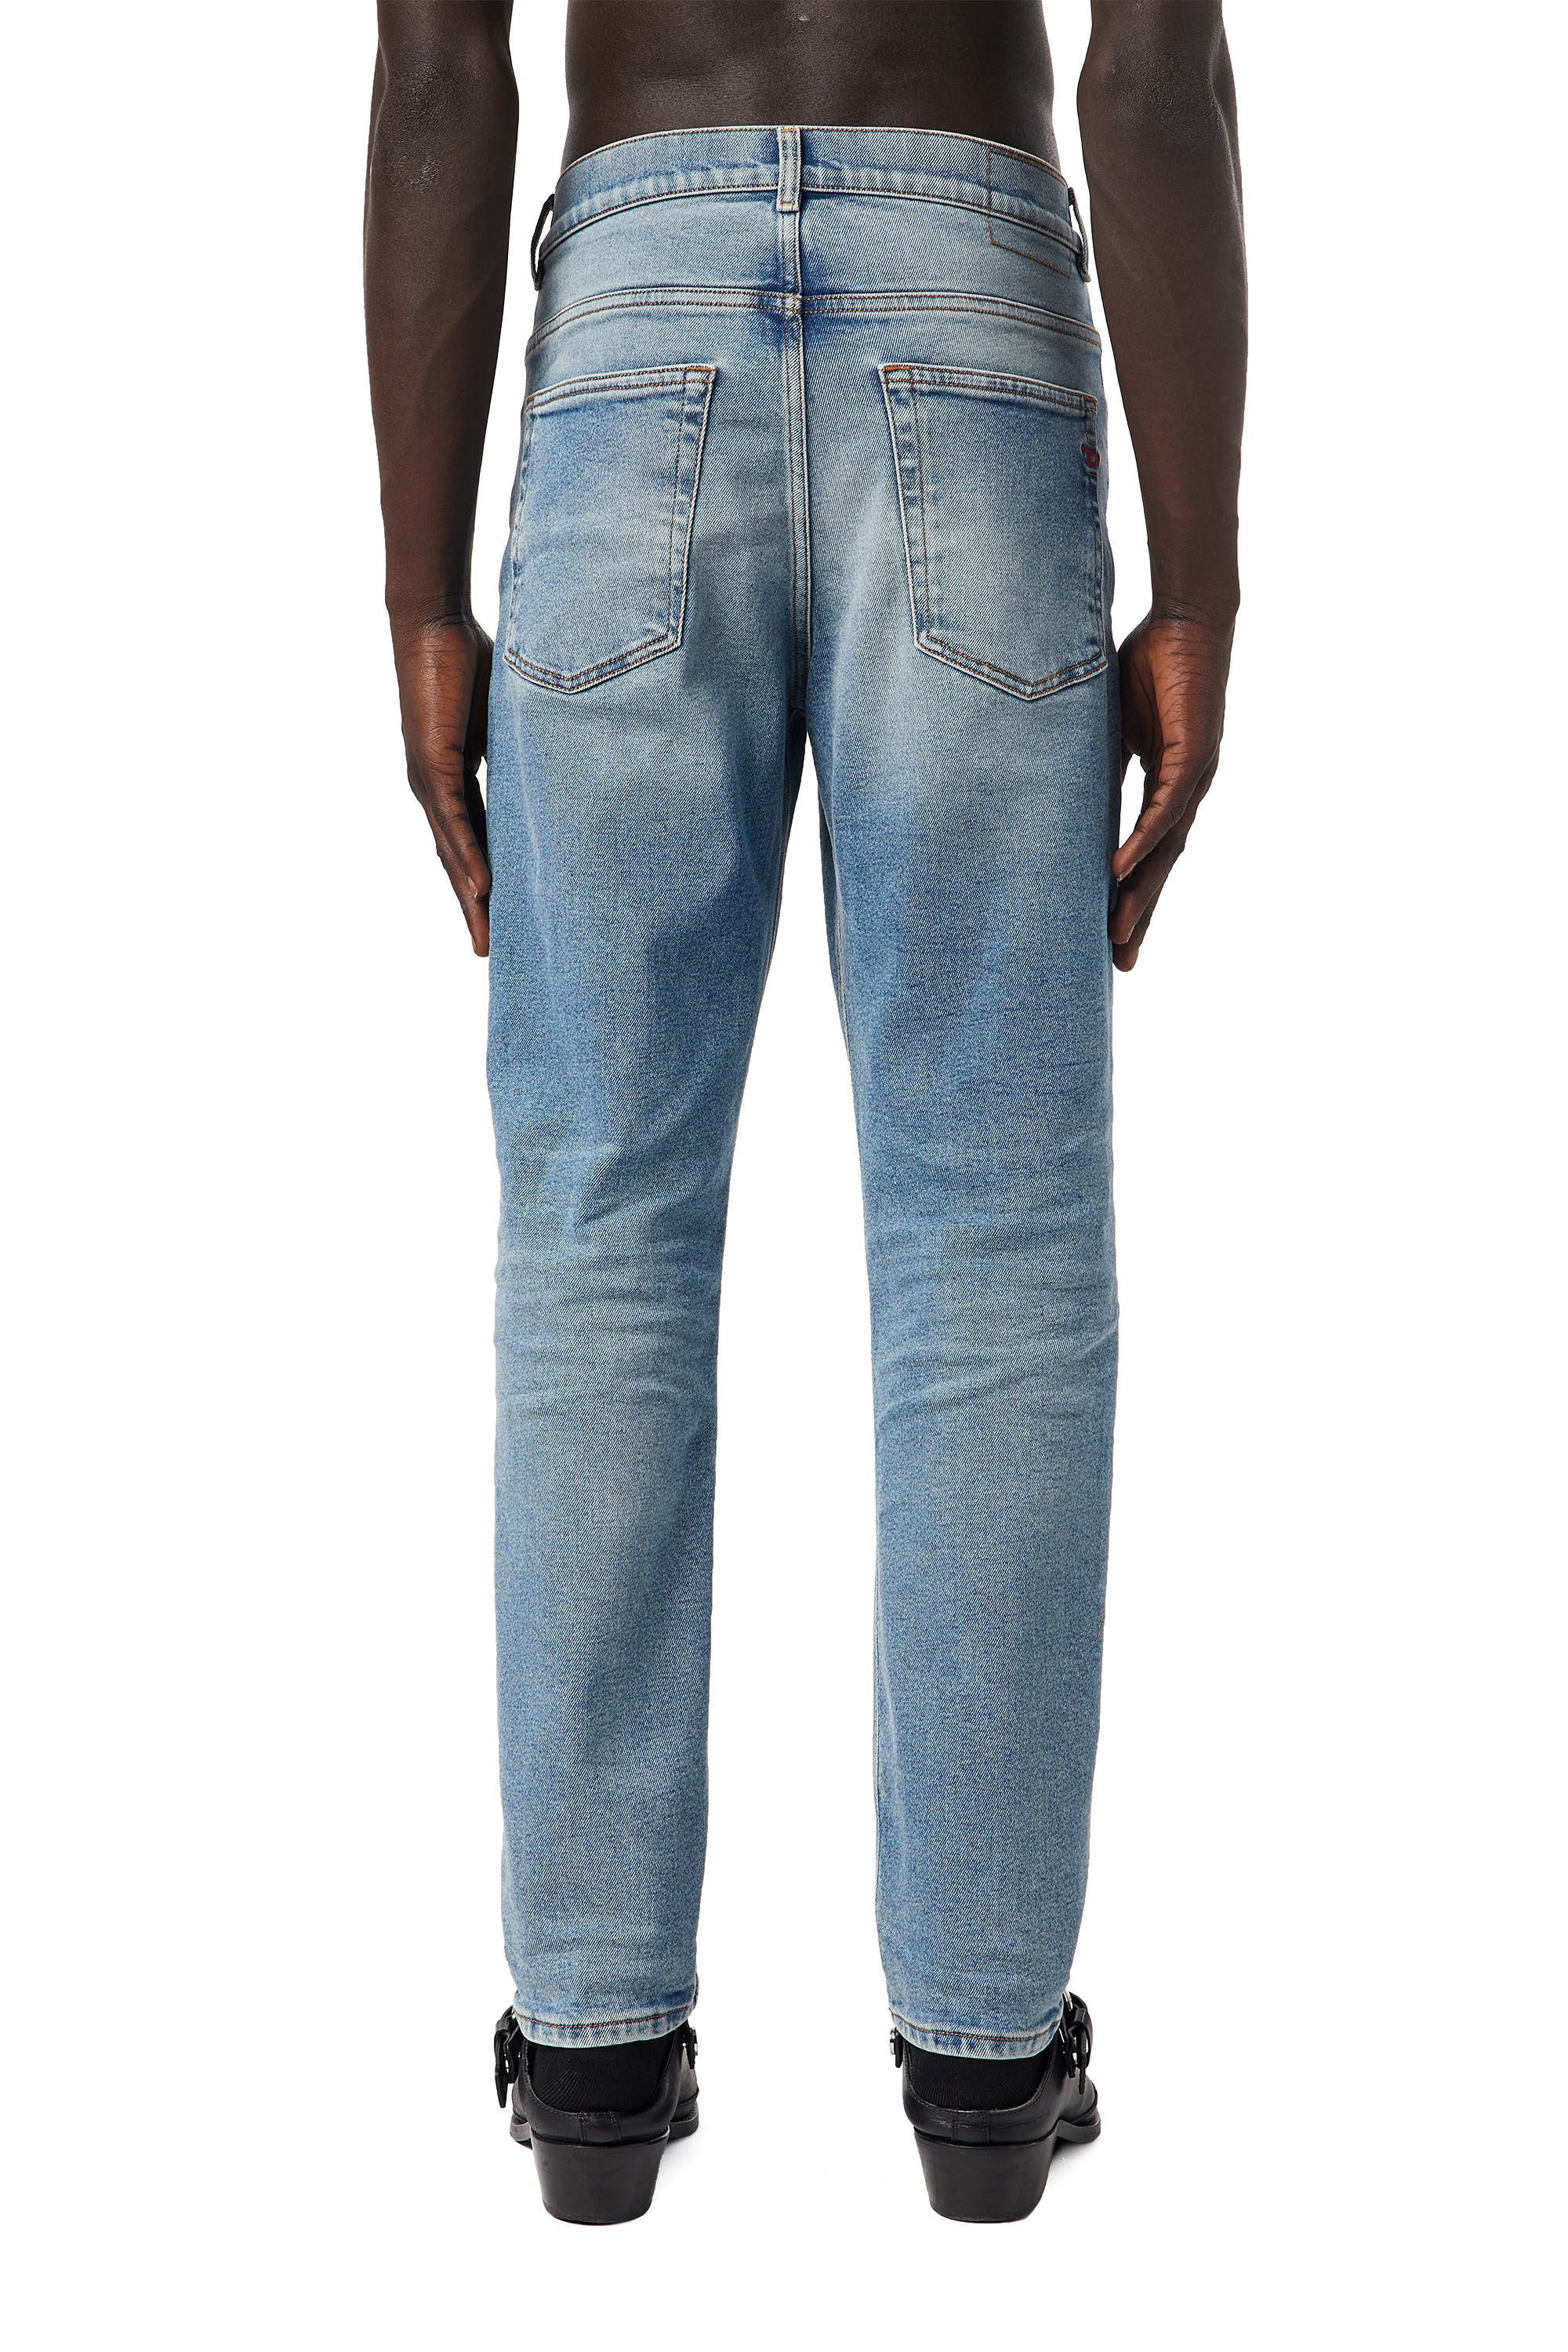 Mens Clothing Jeans Tapered jeans DIESEL Denim 2005 D-finning Tapered Jeans in Blue for Men 